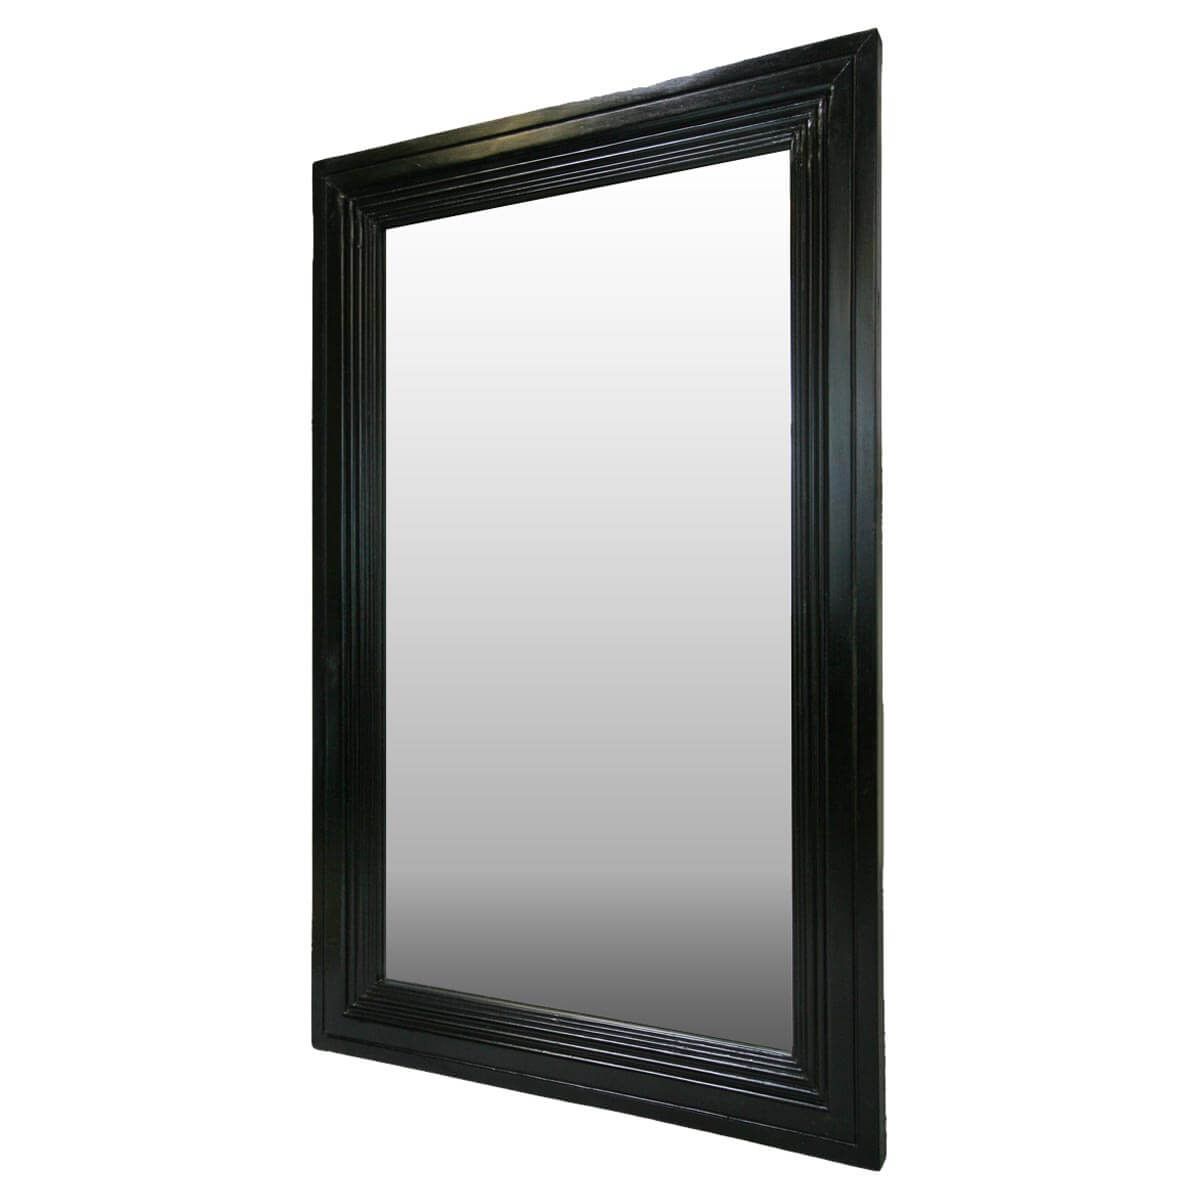 Frontier Rustic Acacia Wood Black Distressed Wall Mirror Frame With Regard To Black Wood Wall Mirrors (View 14 of 15)